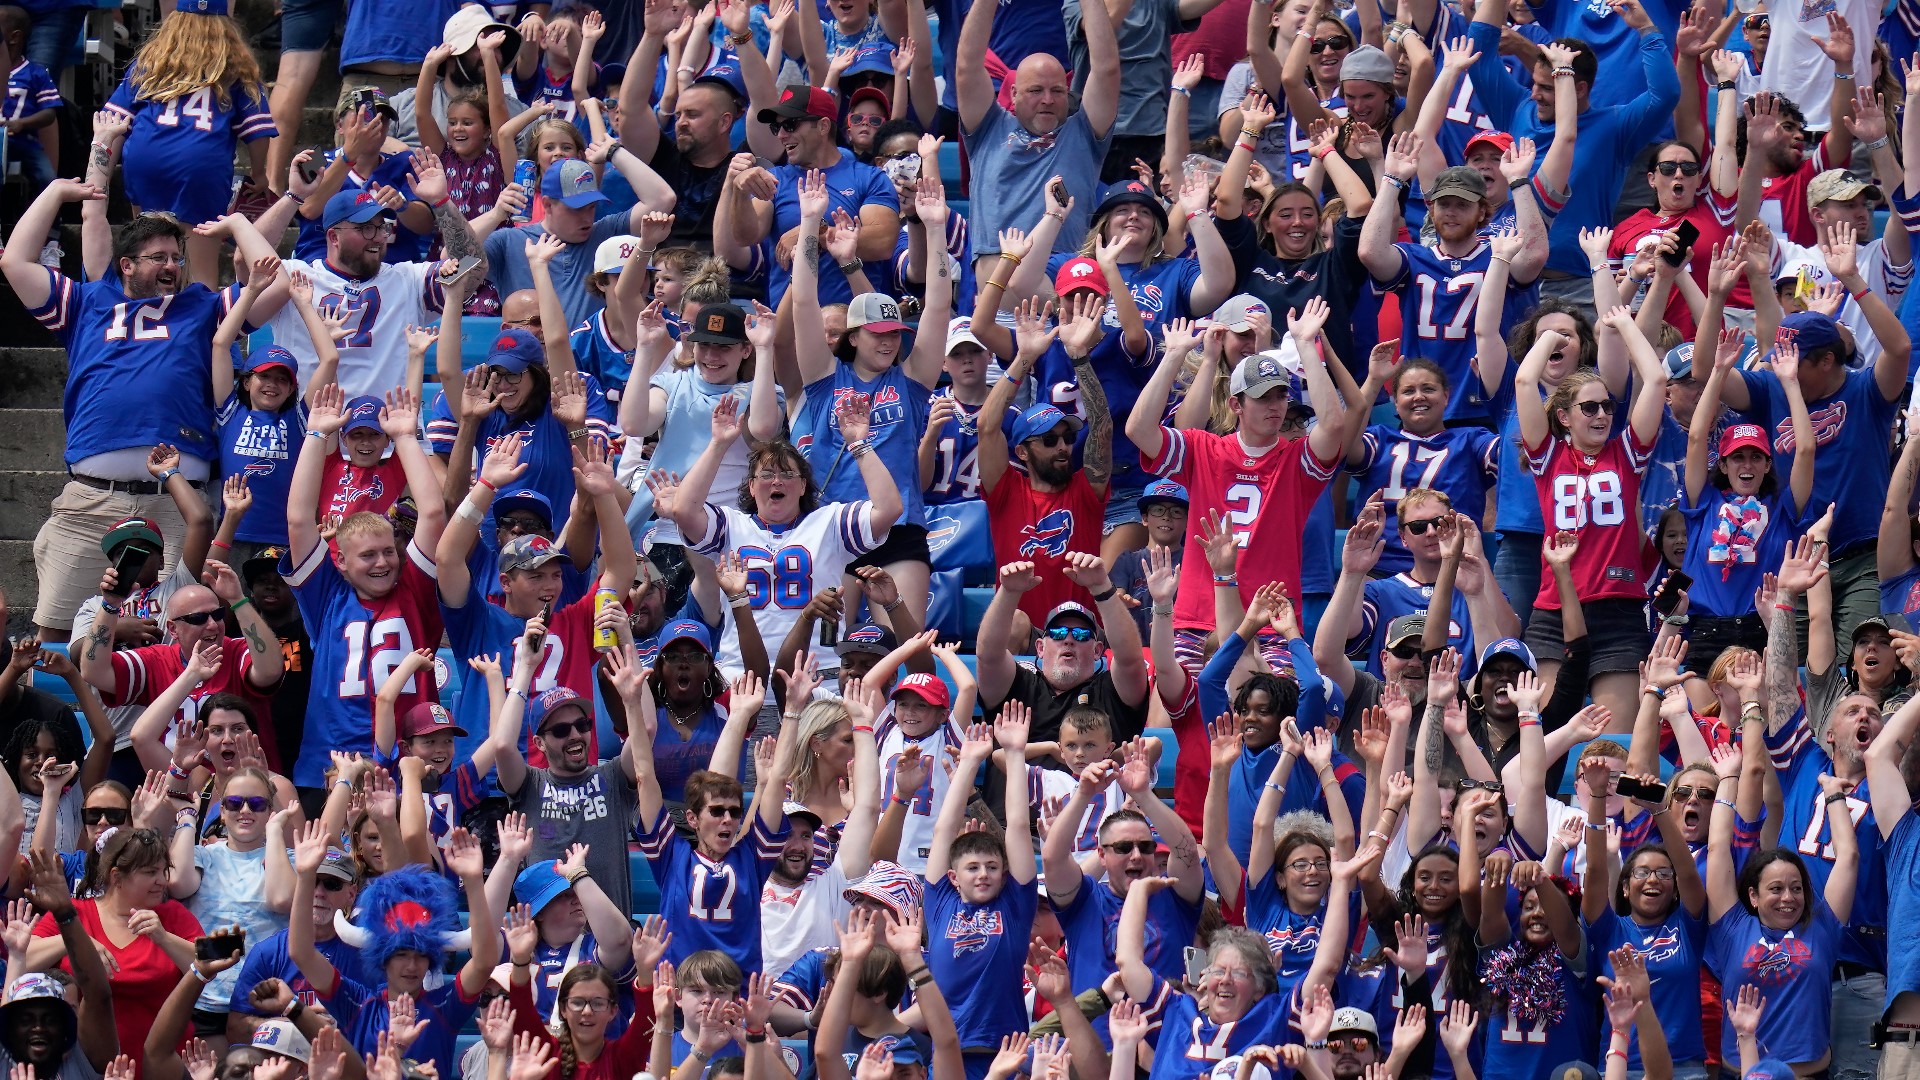 A new survey by the British Gambler found that Buffalo Bills fans drink more alcohol than any other team in the league, an average of 3.3 beverages per game.